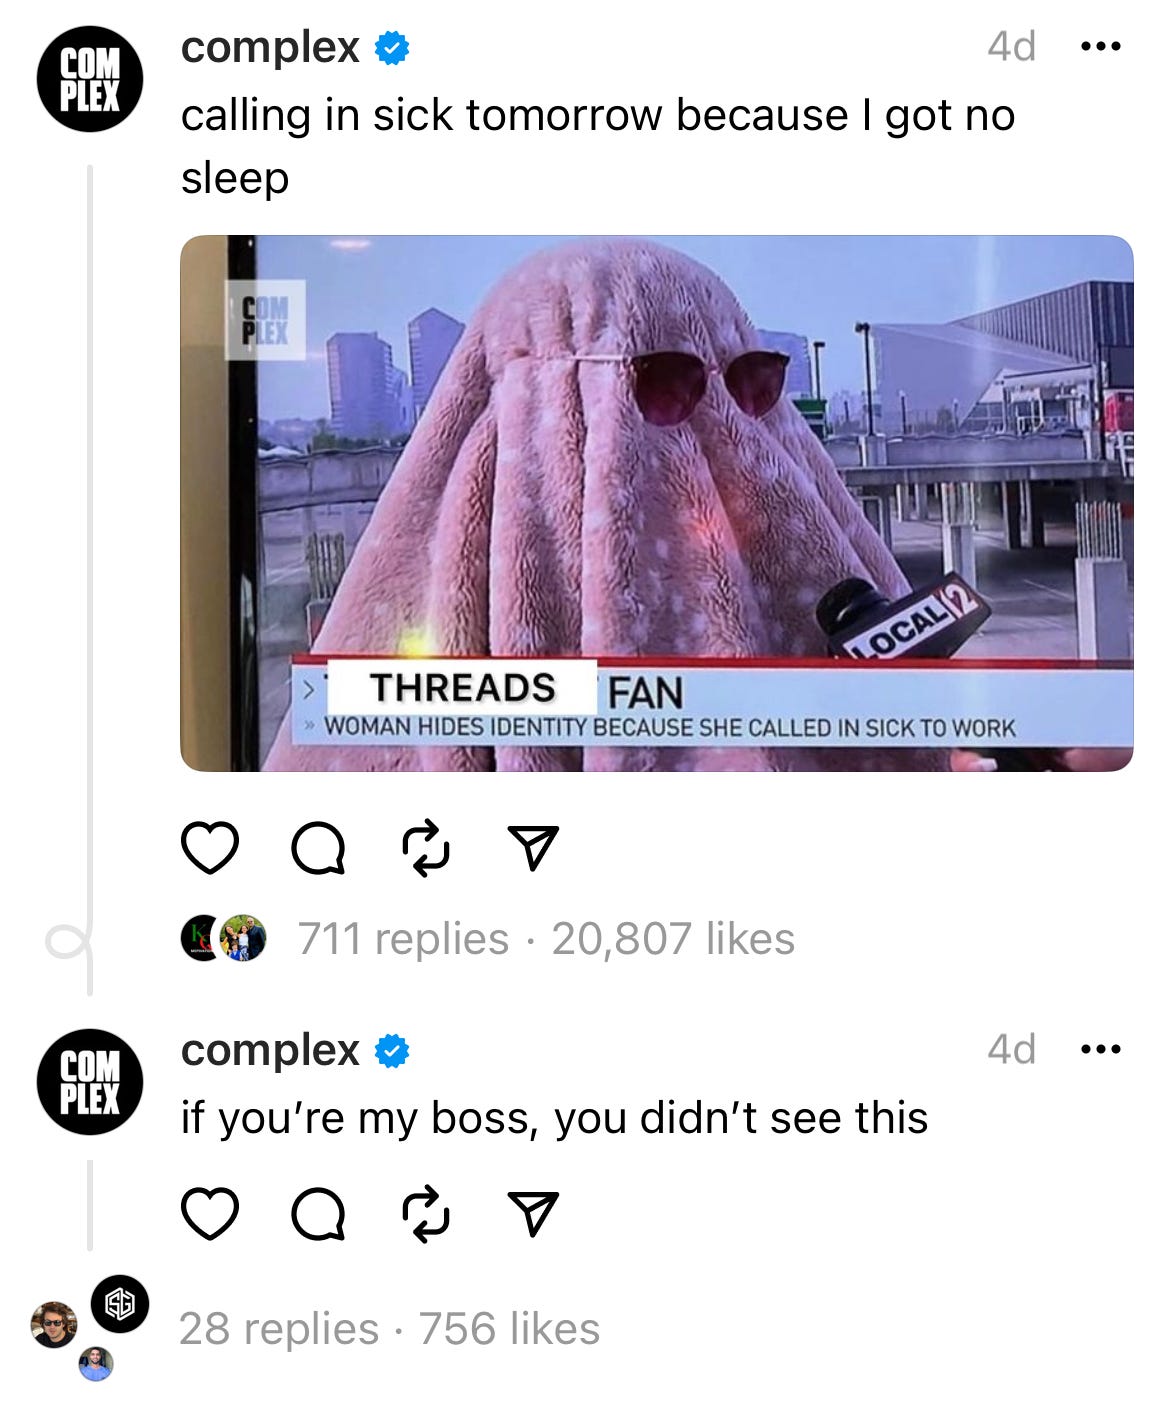 Post from complex that says "if you're my boss, you didn't see this"